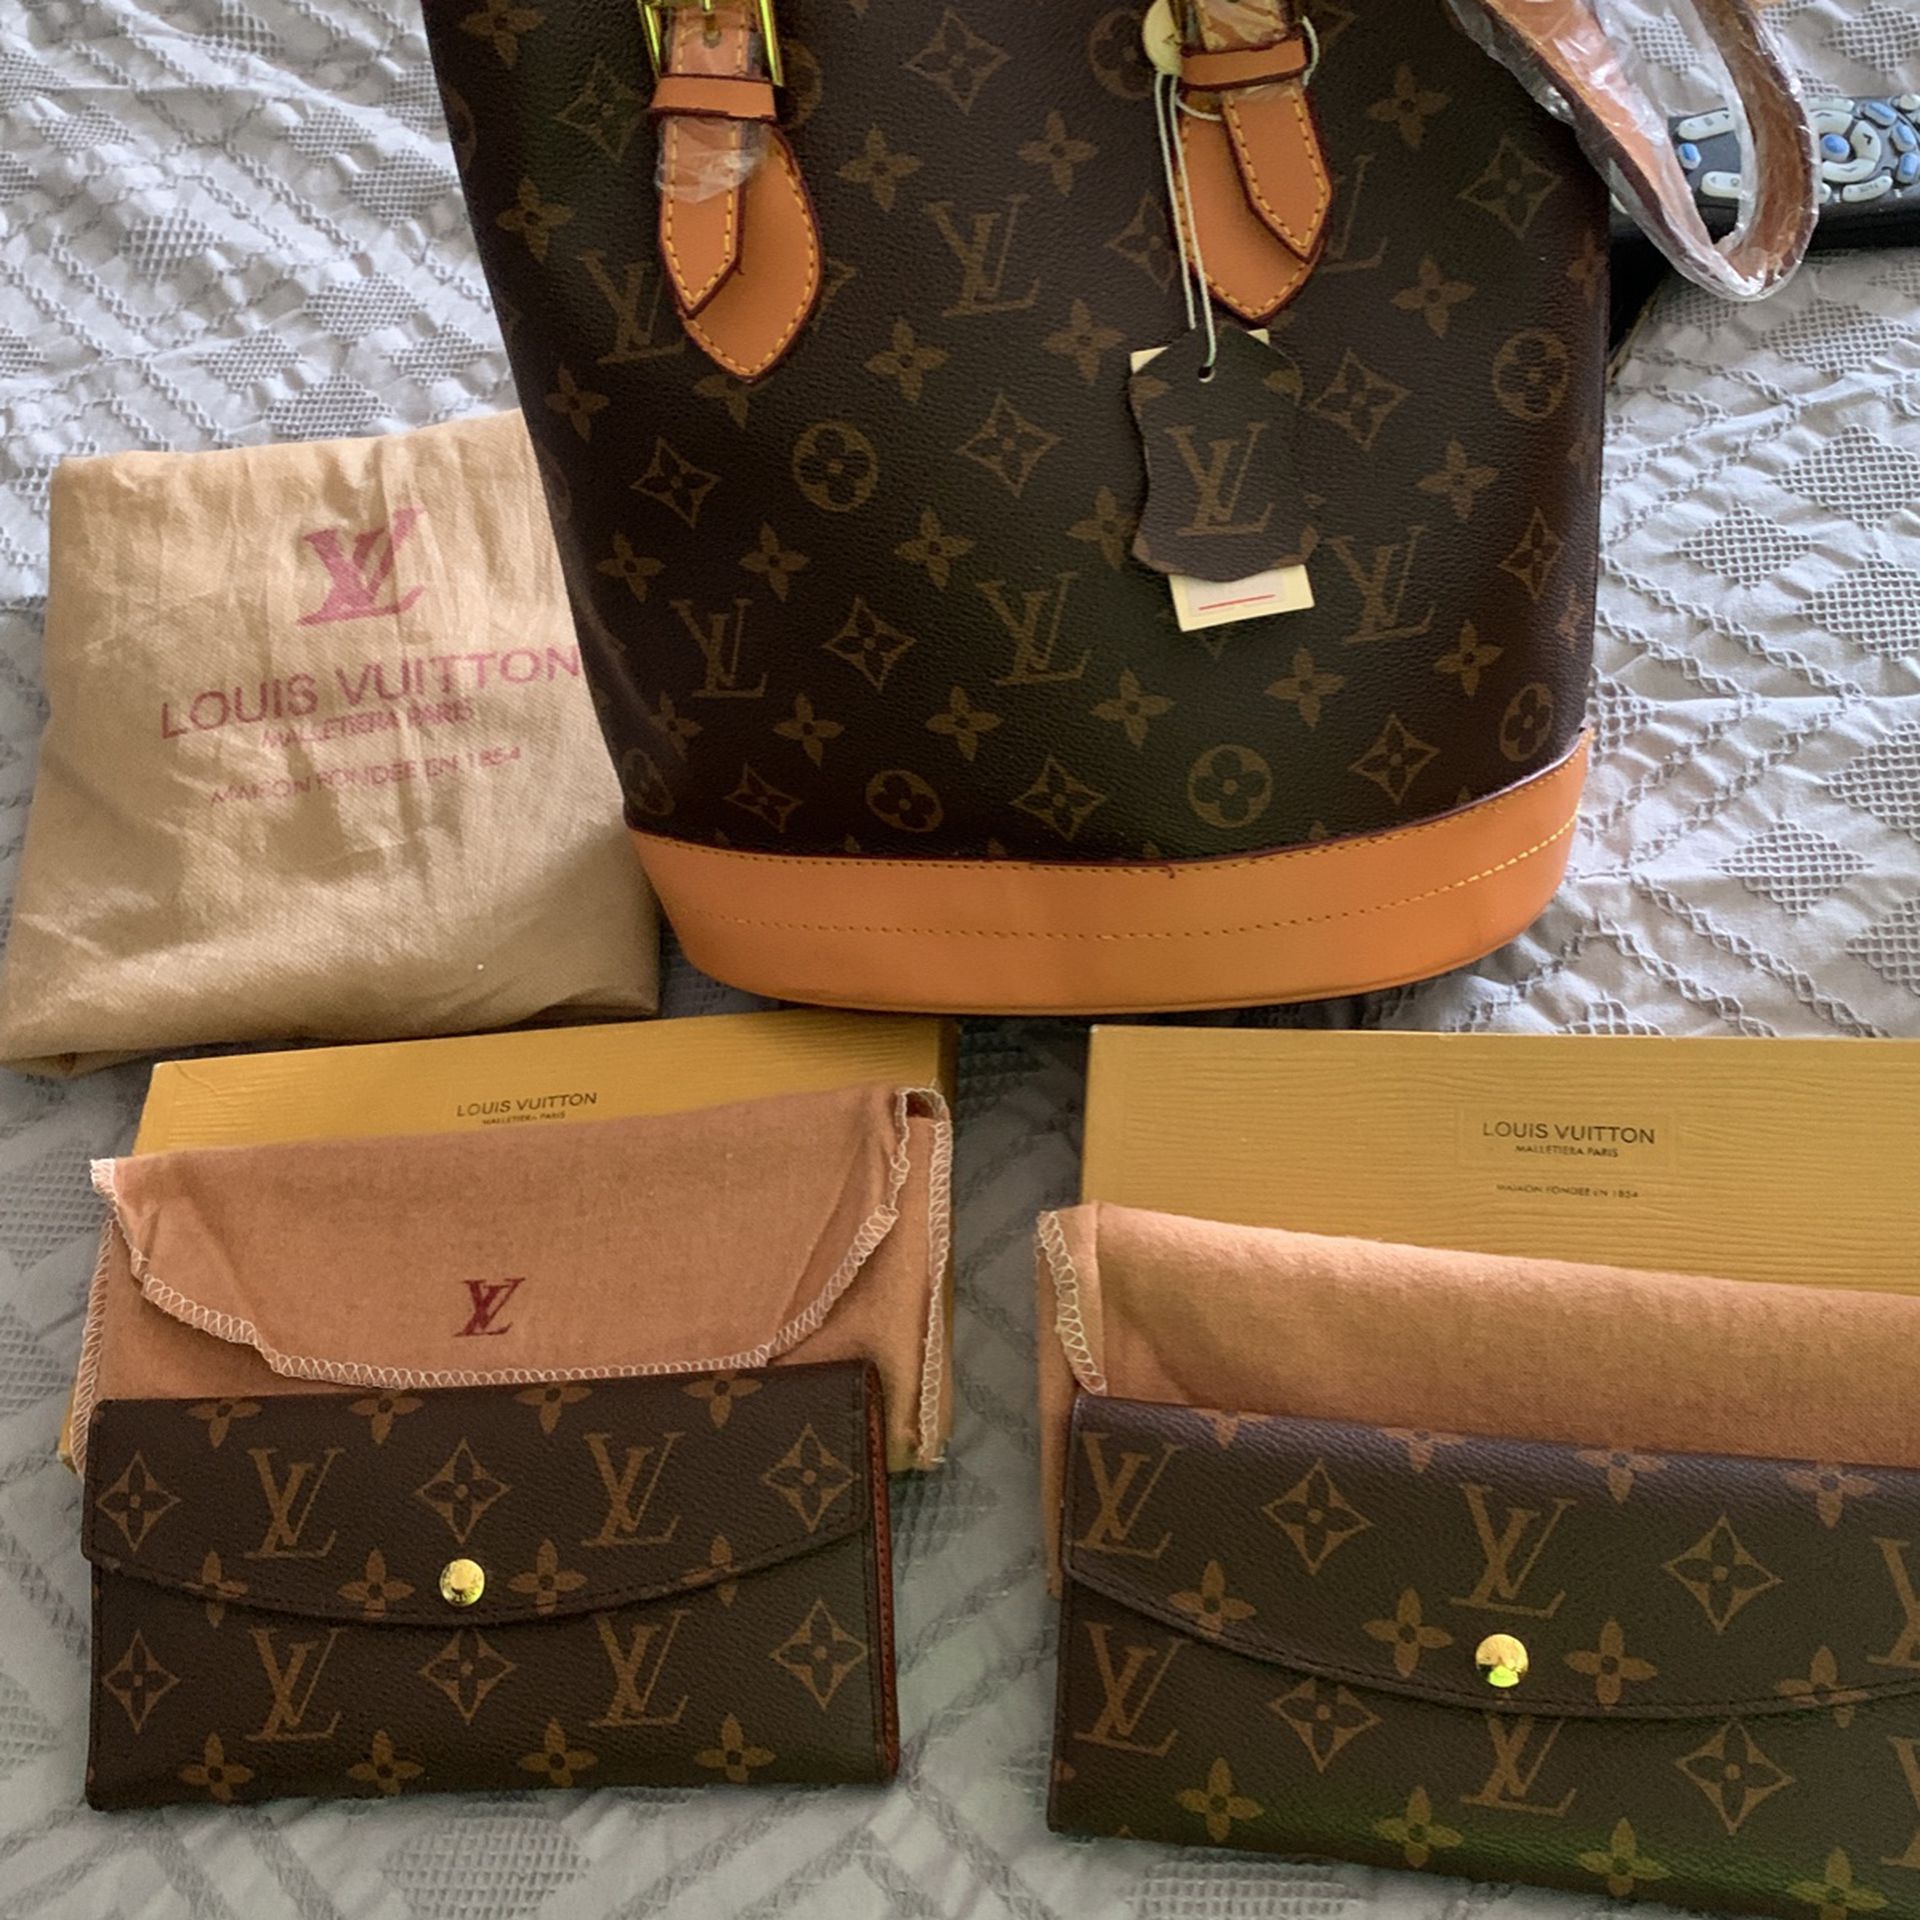 Calling All Louis Vuitton Lovers! – Valamode